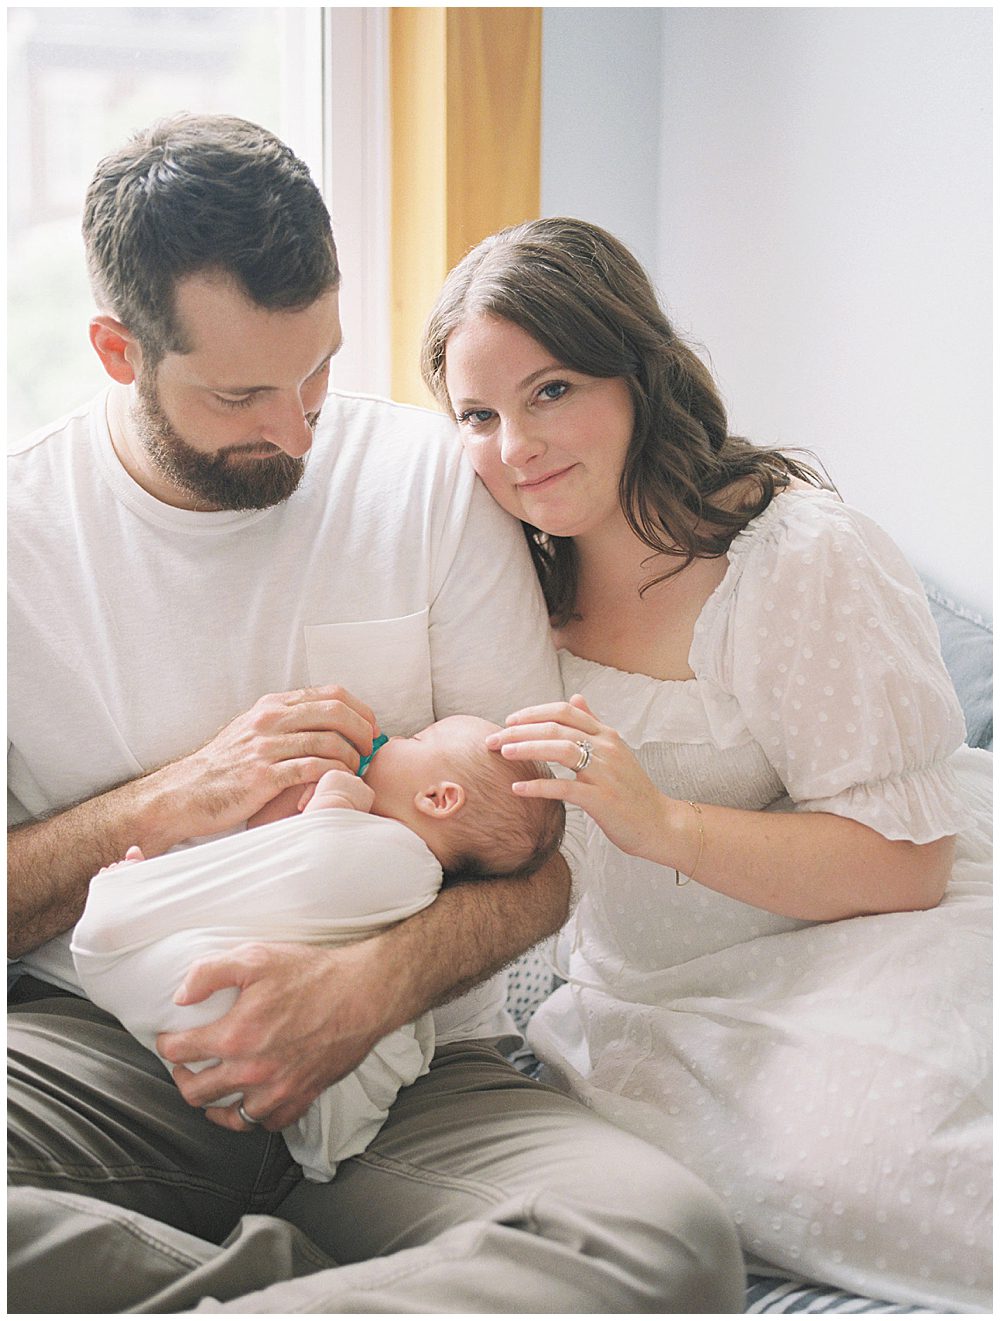 Mom looks at the camera with a soft smiles and touches her baby's head while her husband holds baby.